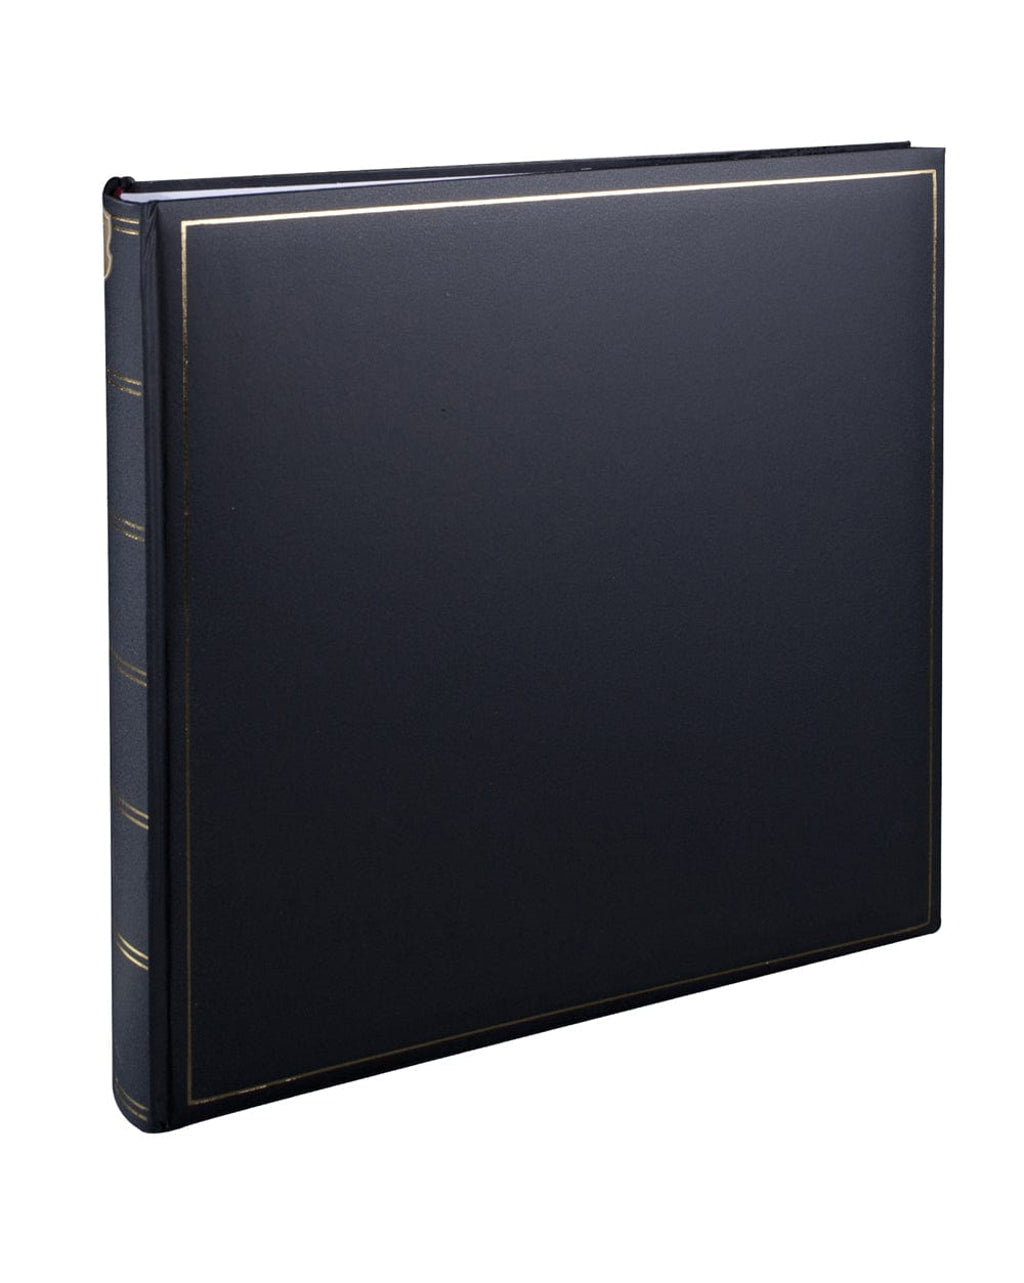 Henzo Champagne Black Photo Album 350x350mm - 70 White Pages from our Photo Albums collection by Henzo